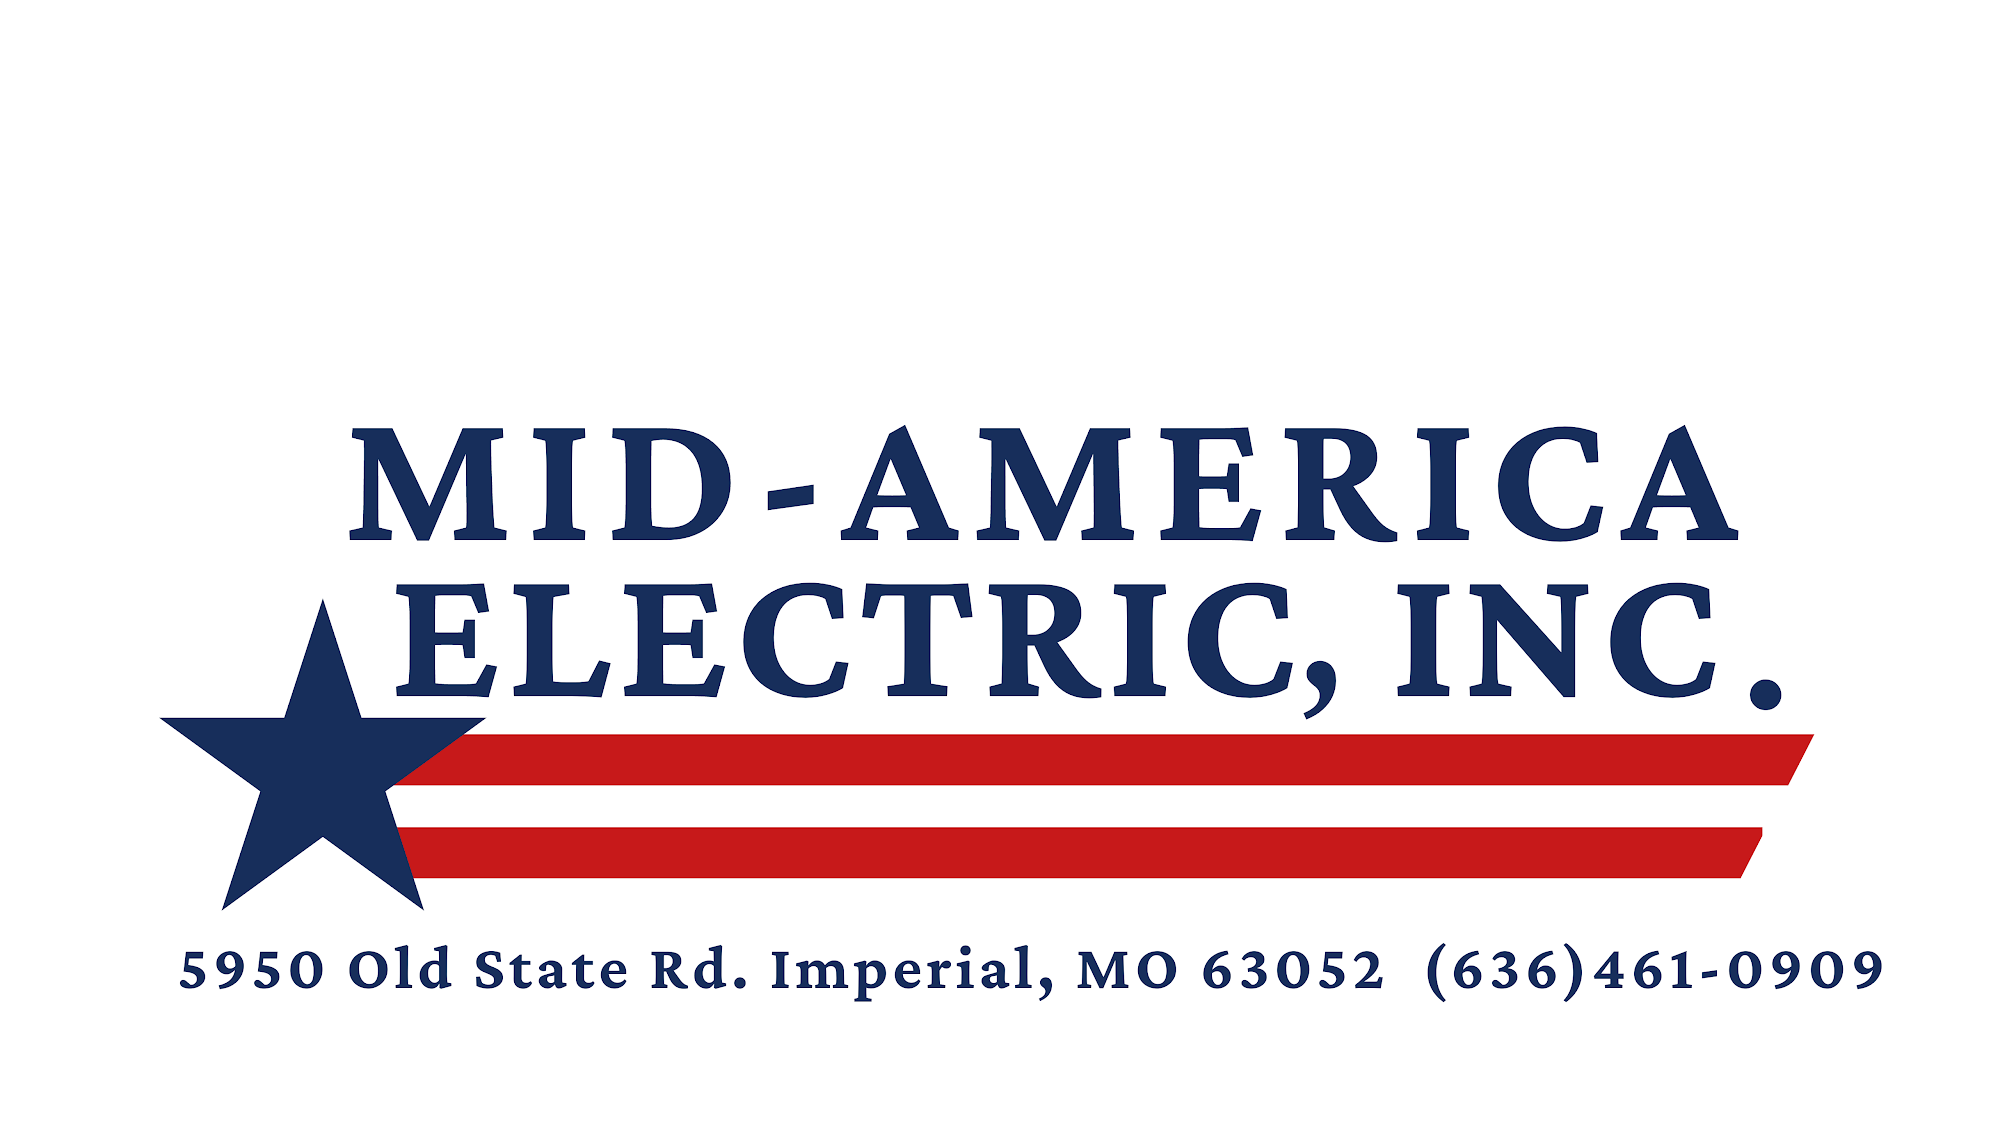 Mid-America Electric, Inc. 5950 Old State Rd, Imperial Missouri 63052